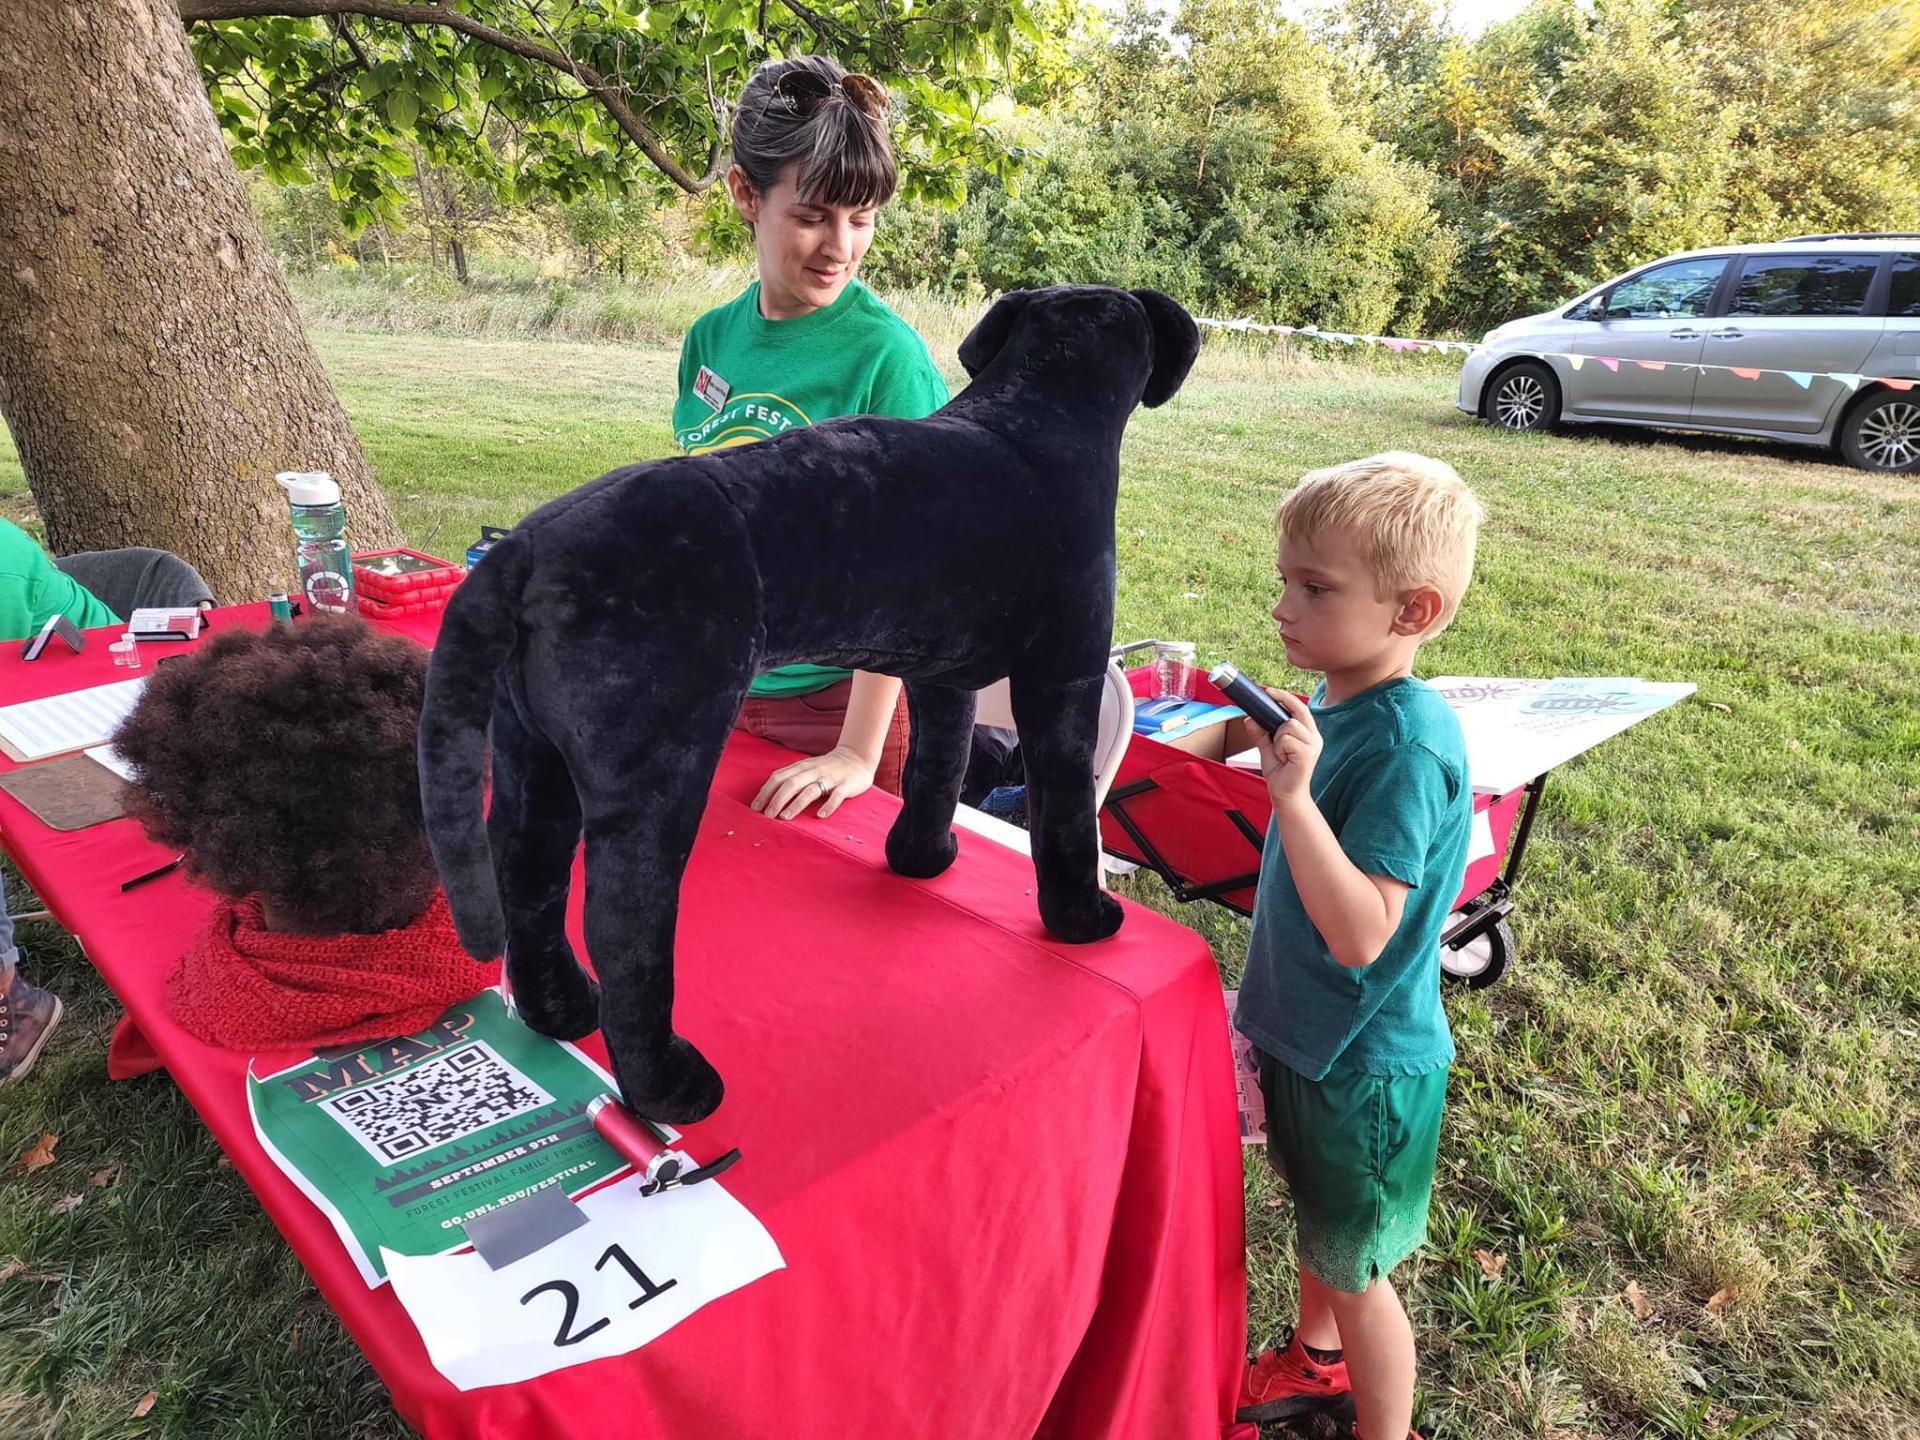 photo of tick outreach event with children searching for ticks on stuffed animal dog